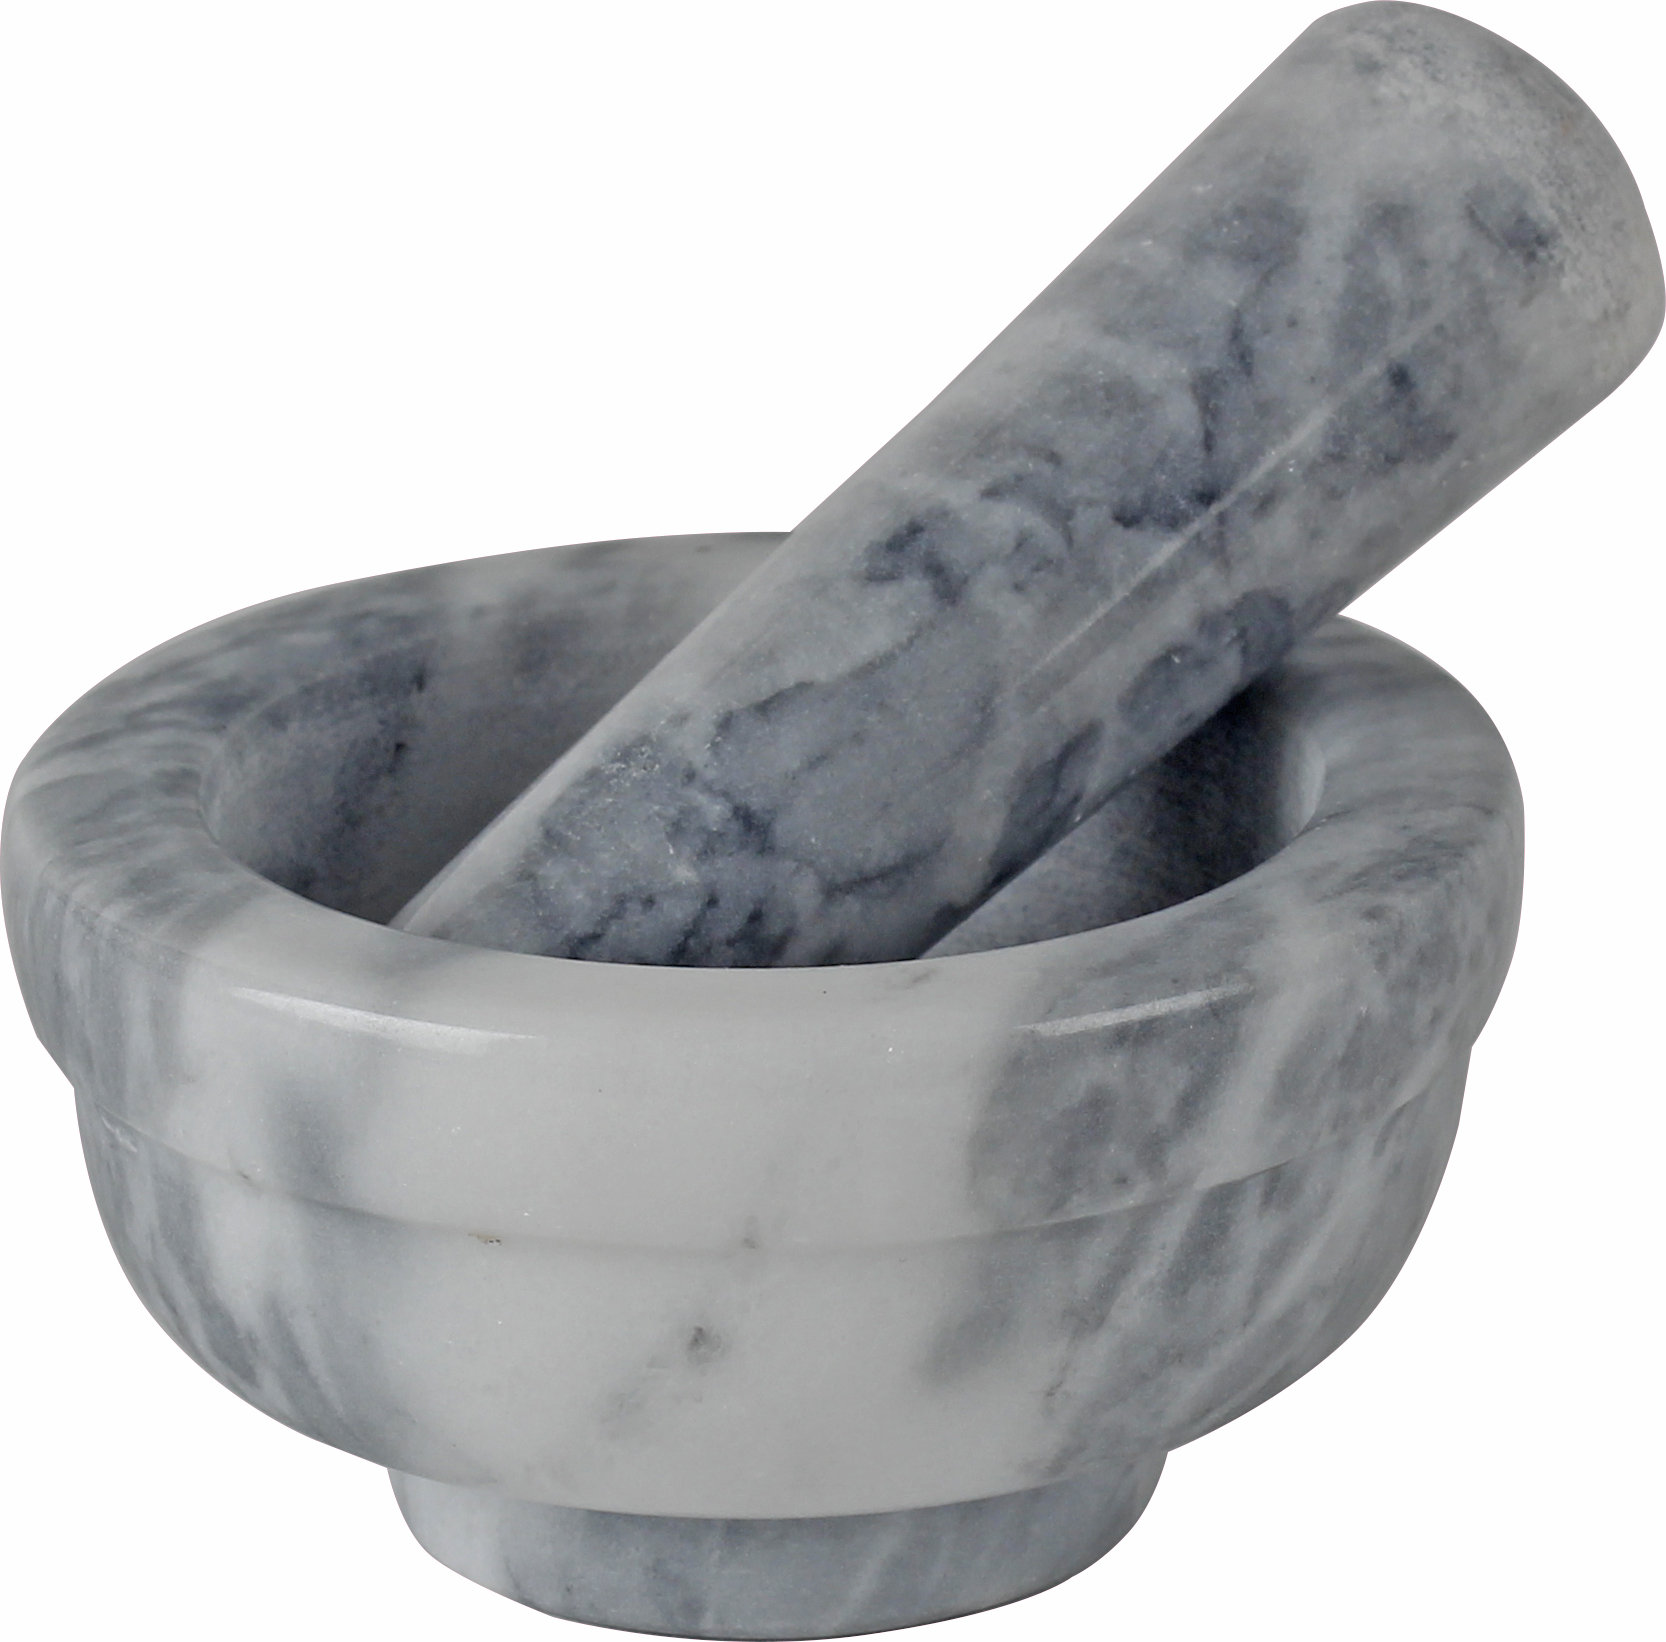 Chef'n Granite and Silicone Mortar and Pestle Set